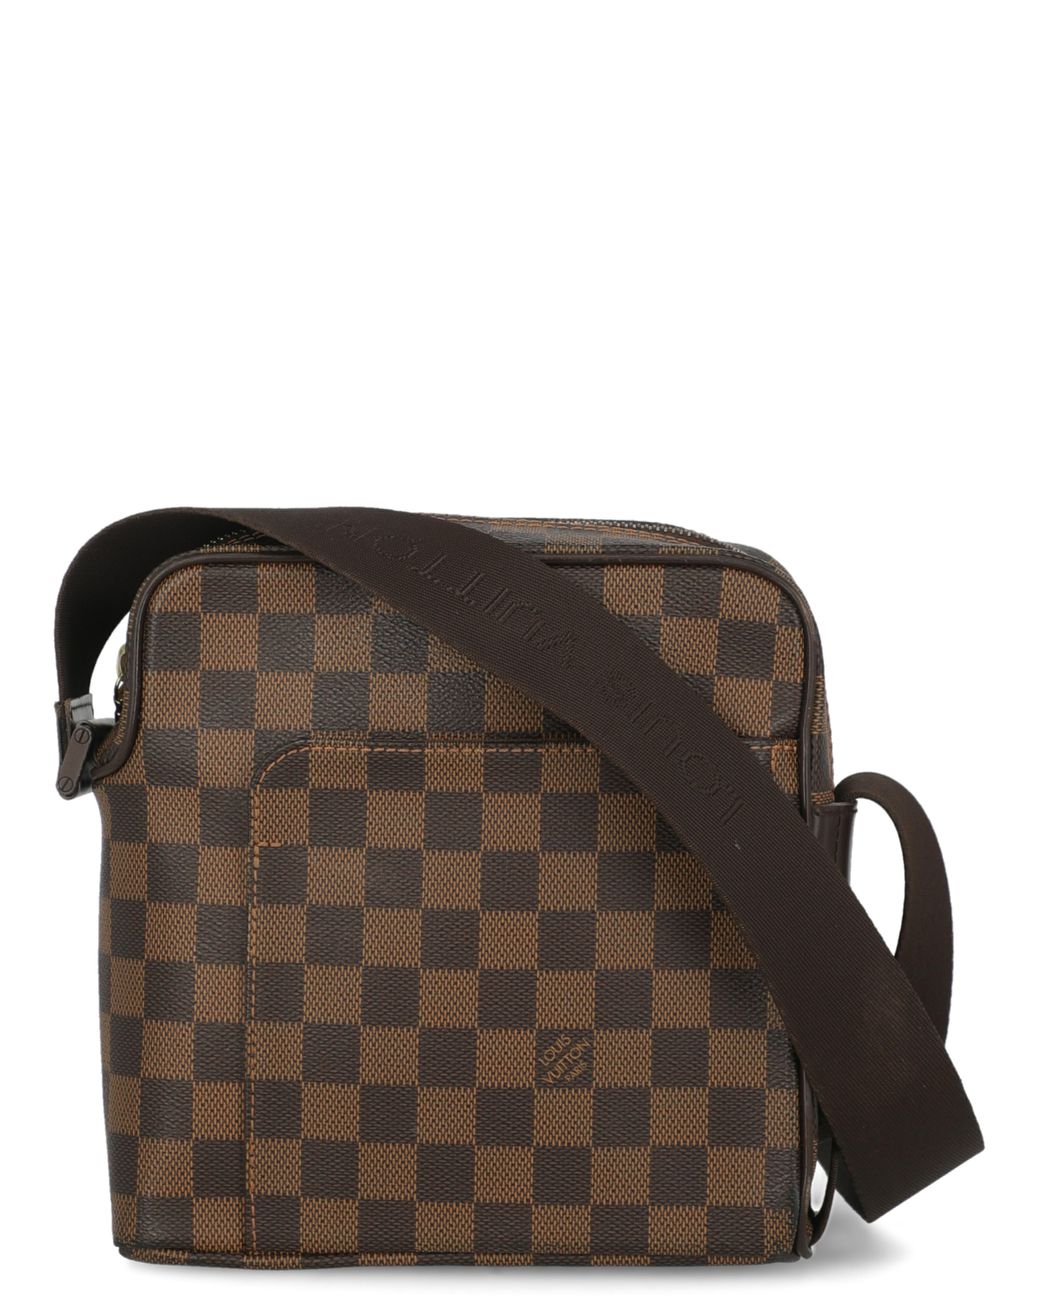 Louis Vuitton Used Cross Body ! Brown - $200 (33% Off Retail